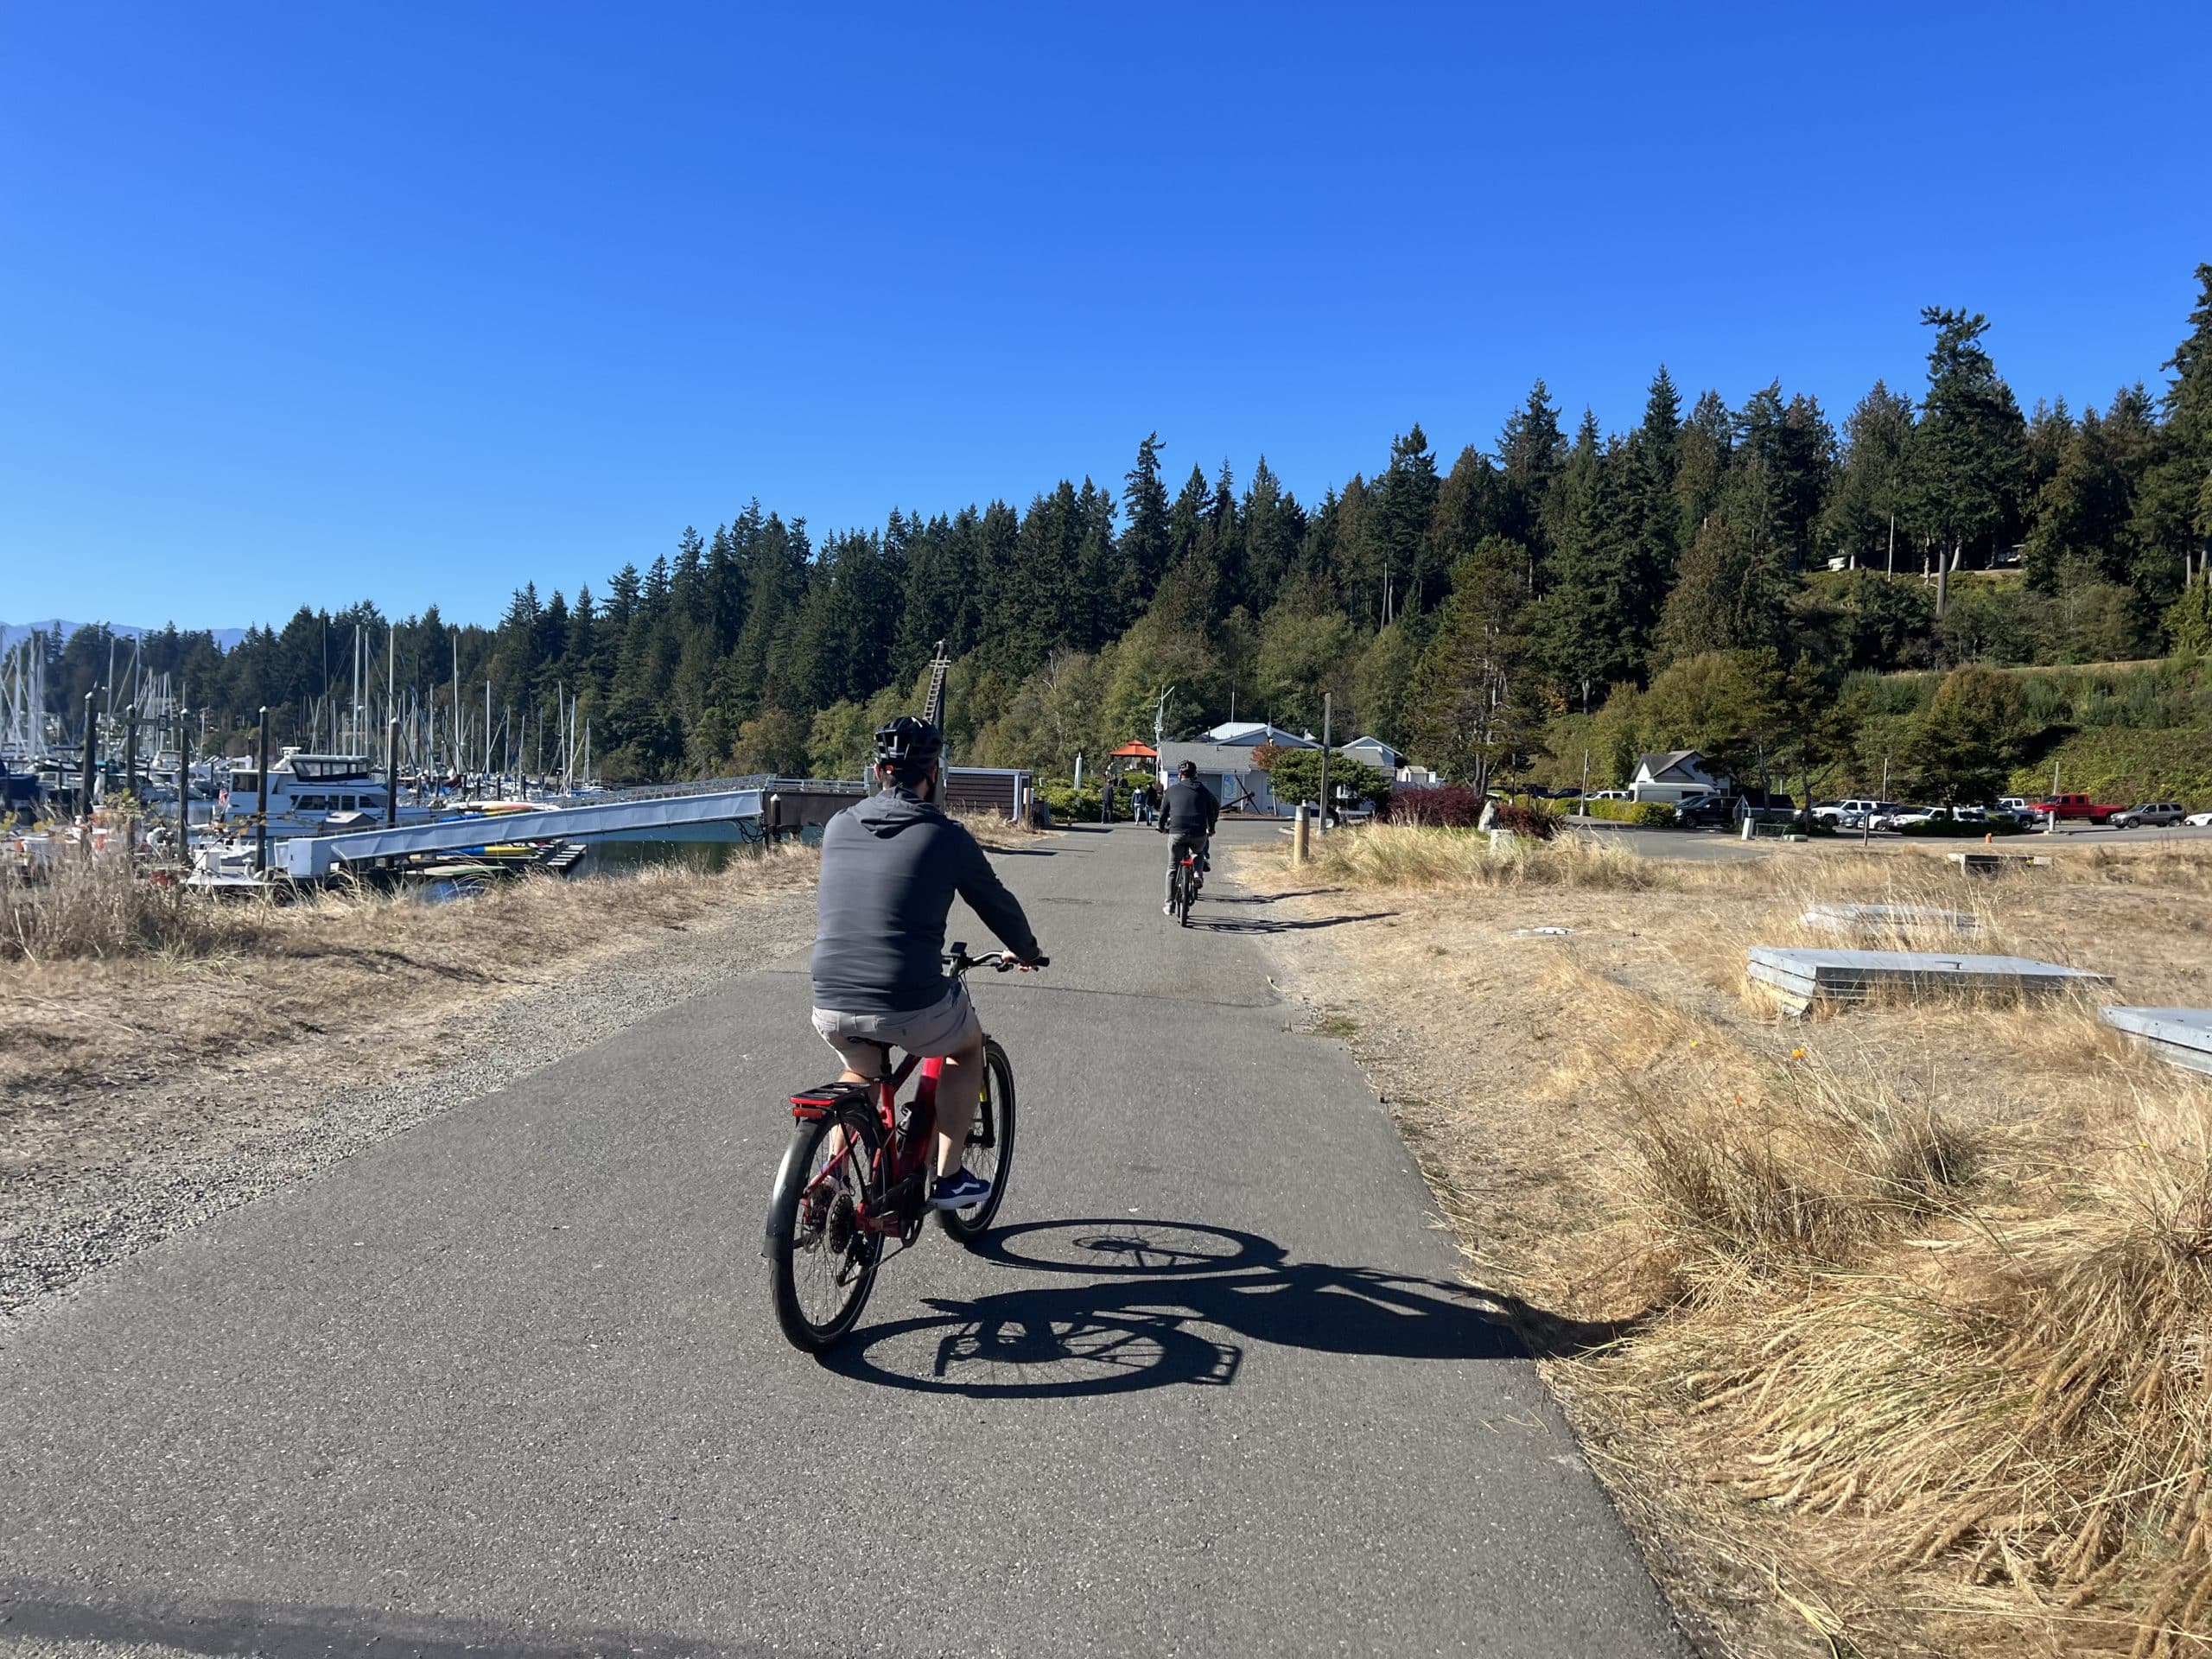 Port Ludlow offered plenty of outdoor activities for TUNE employees to enjoy